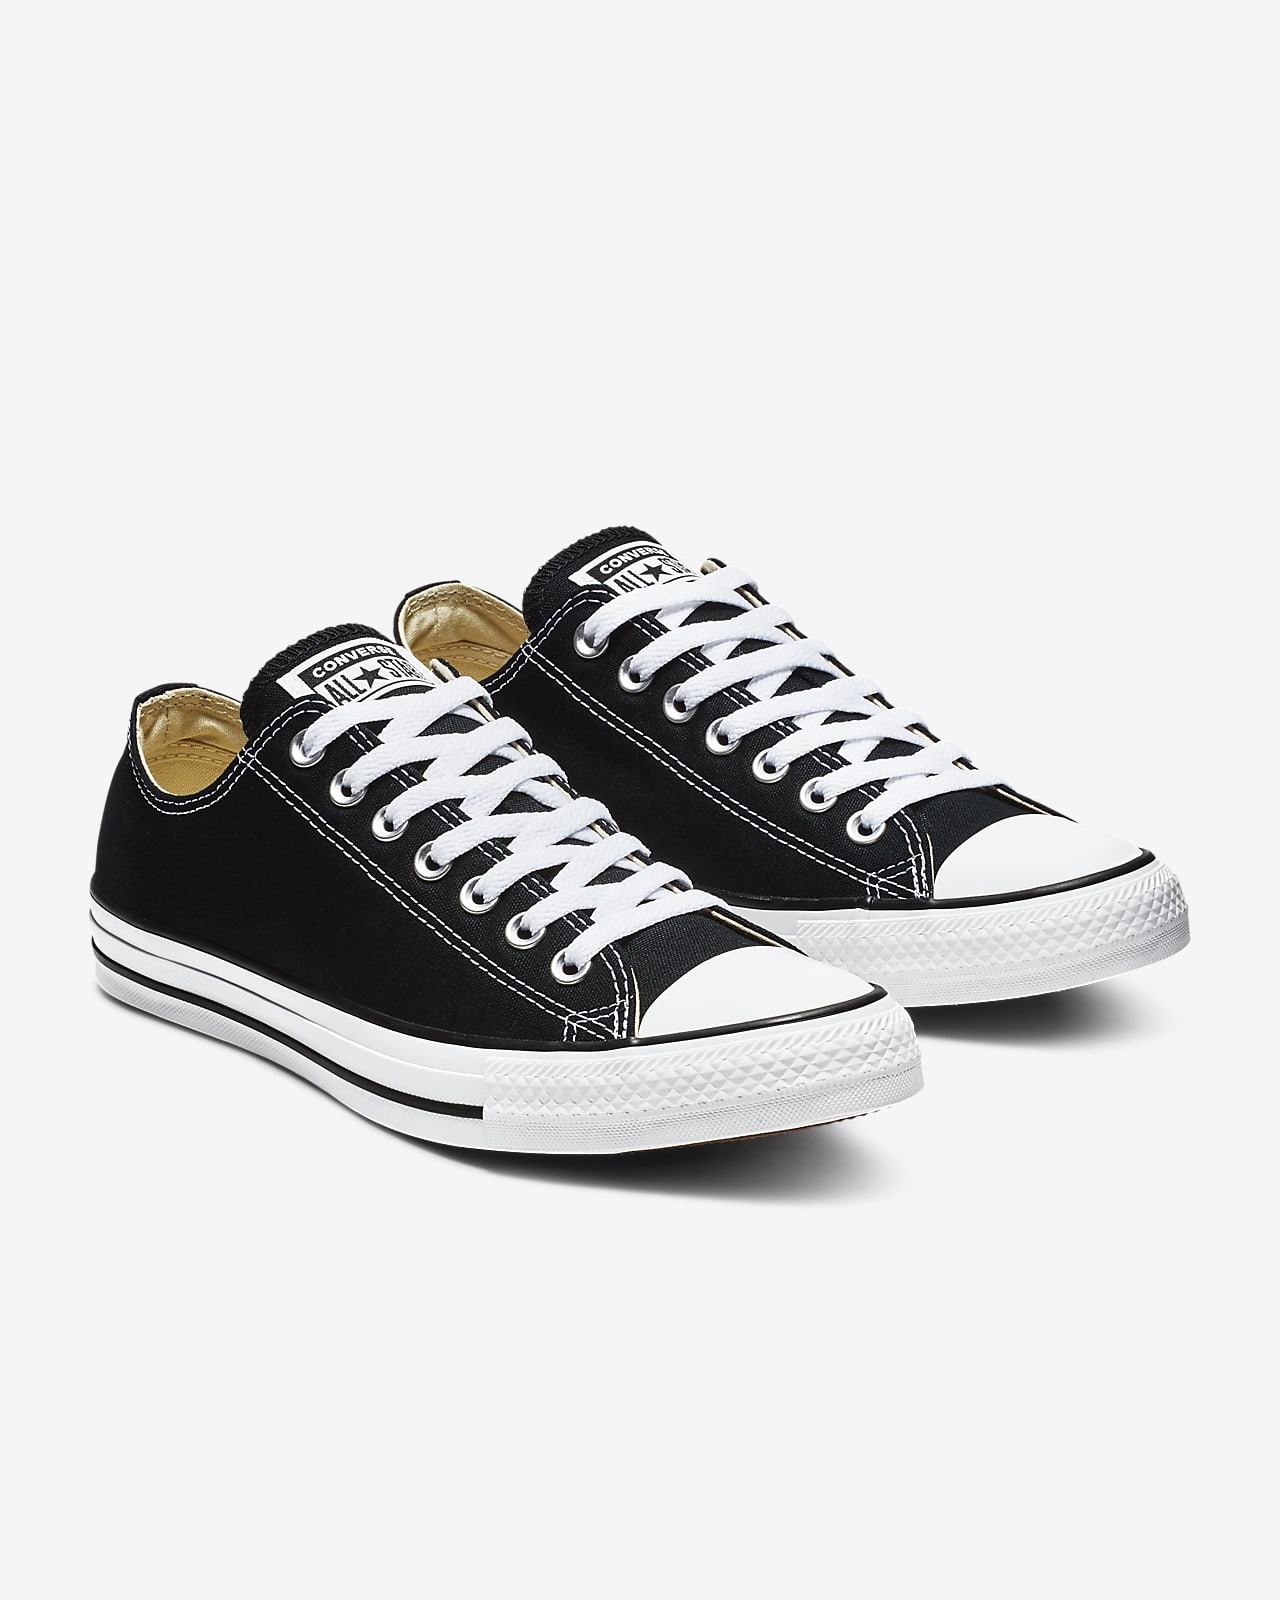 Converse Chuck Taylor All Star Low Top Unisex Shoes. 